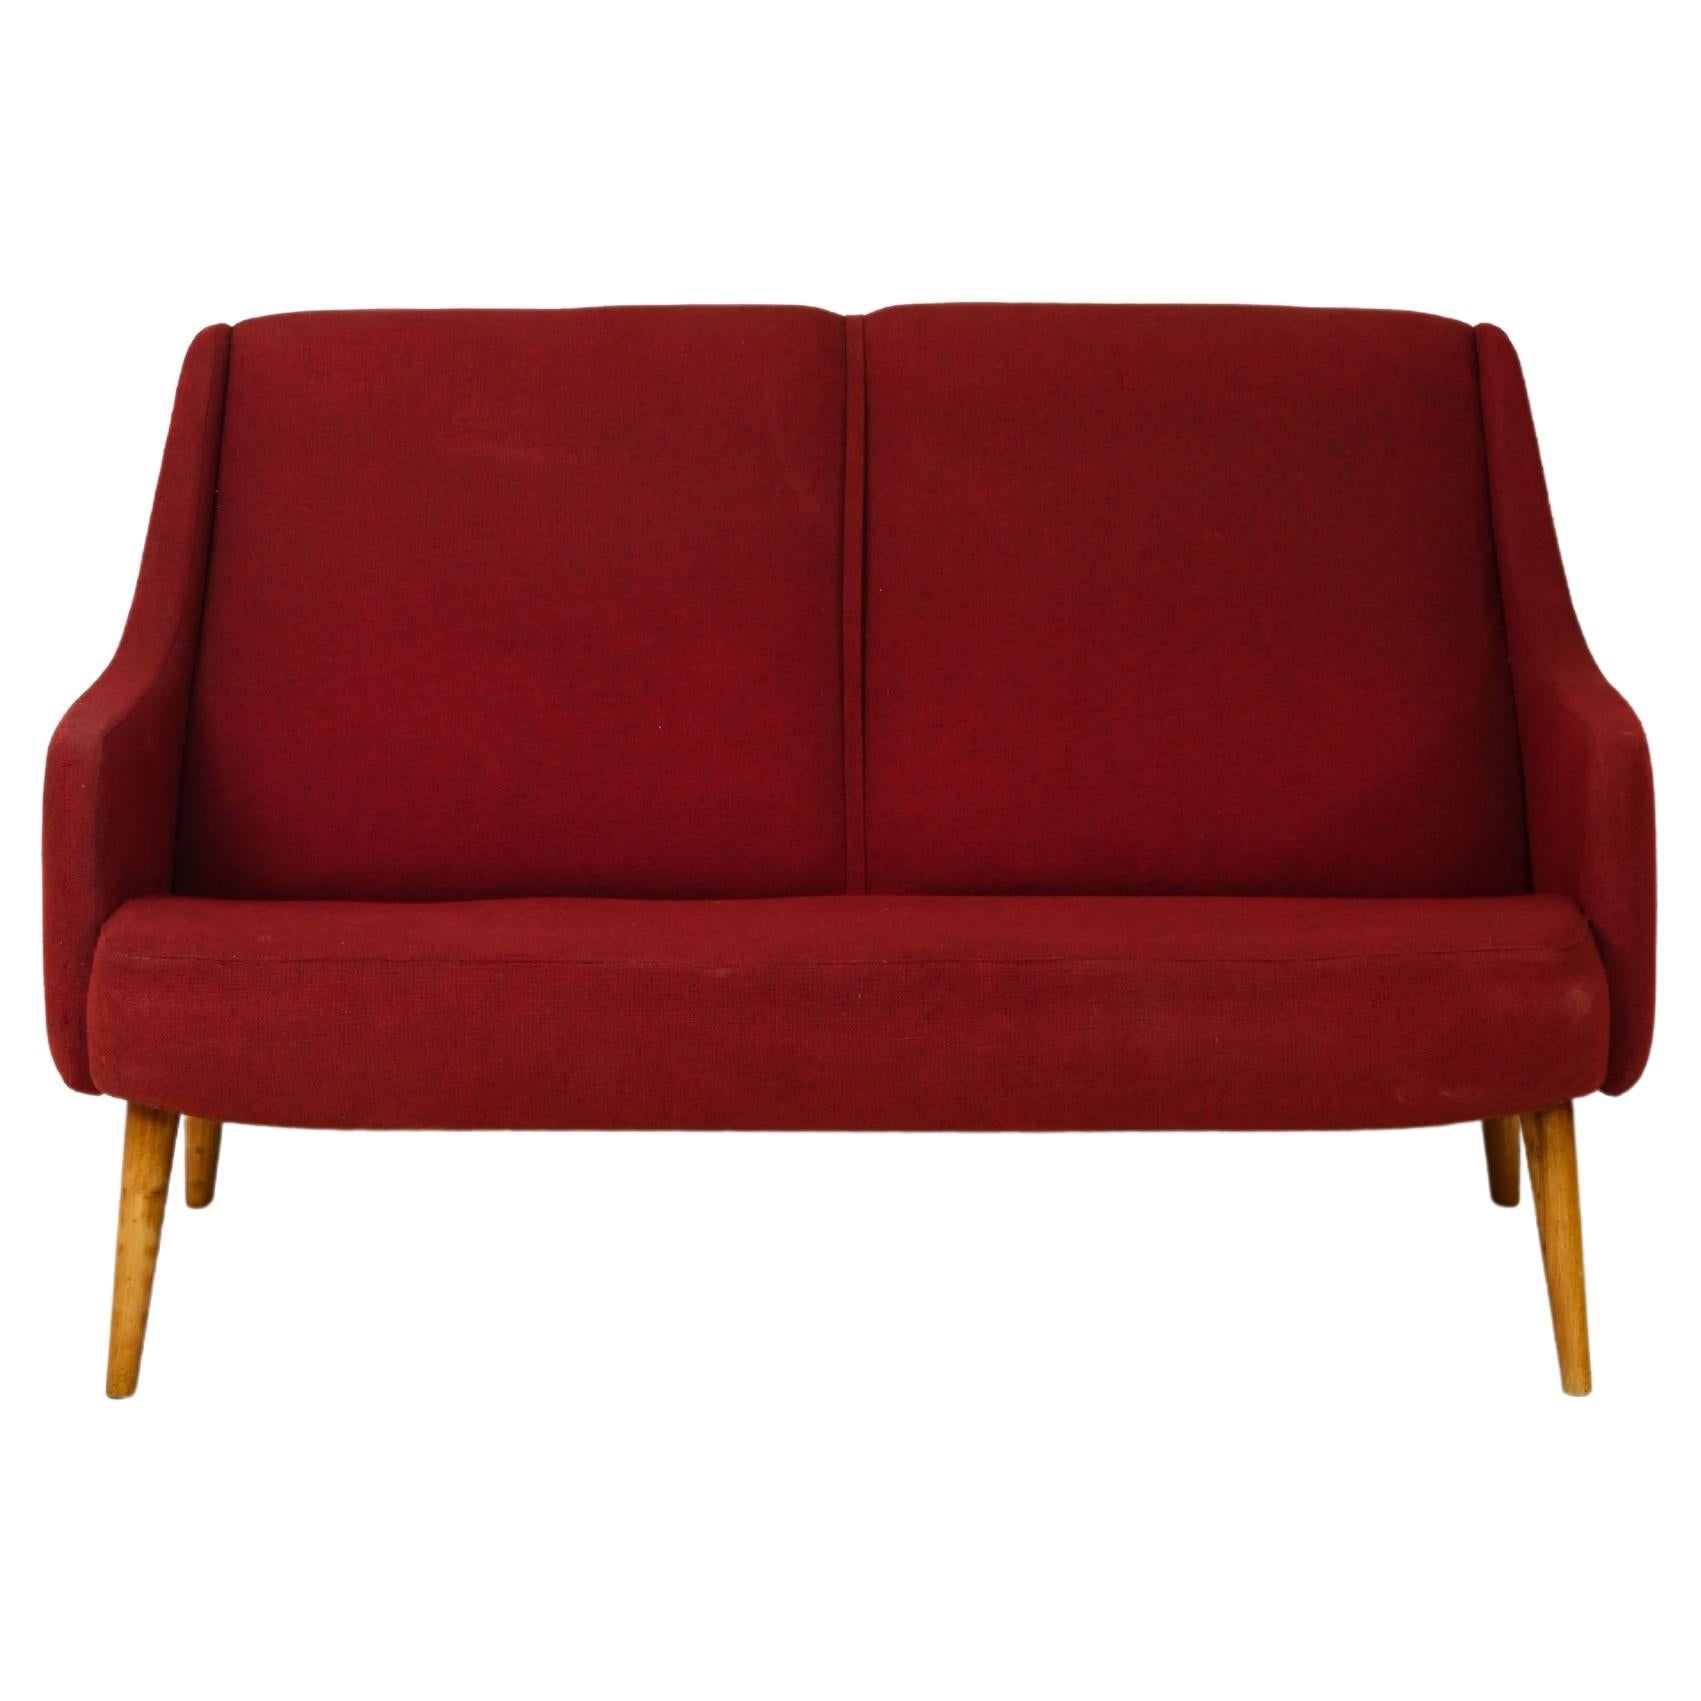 Vintage Red Two-Seater Sofa